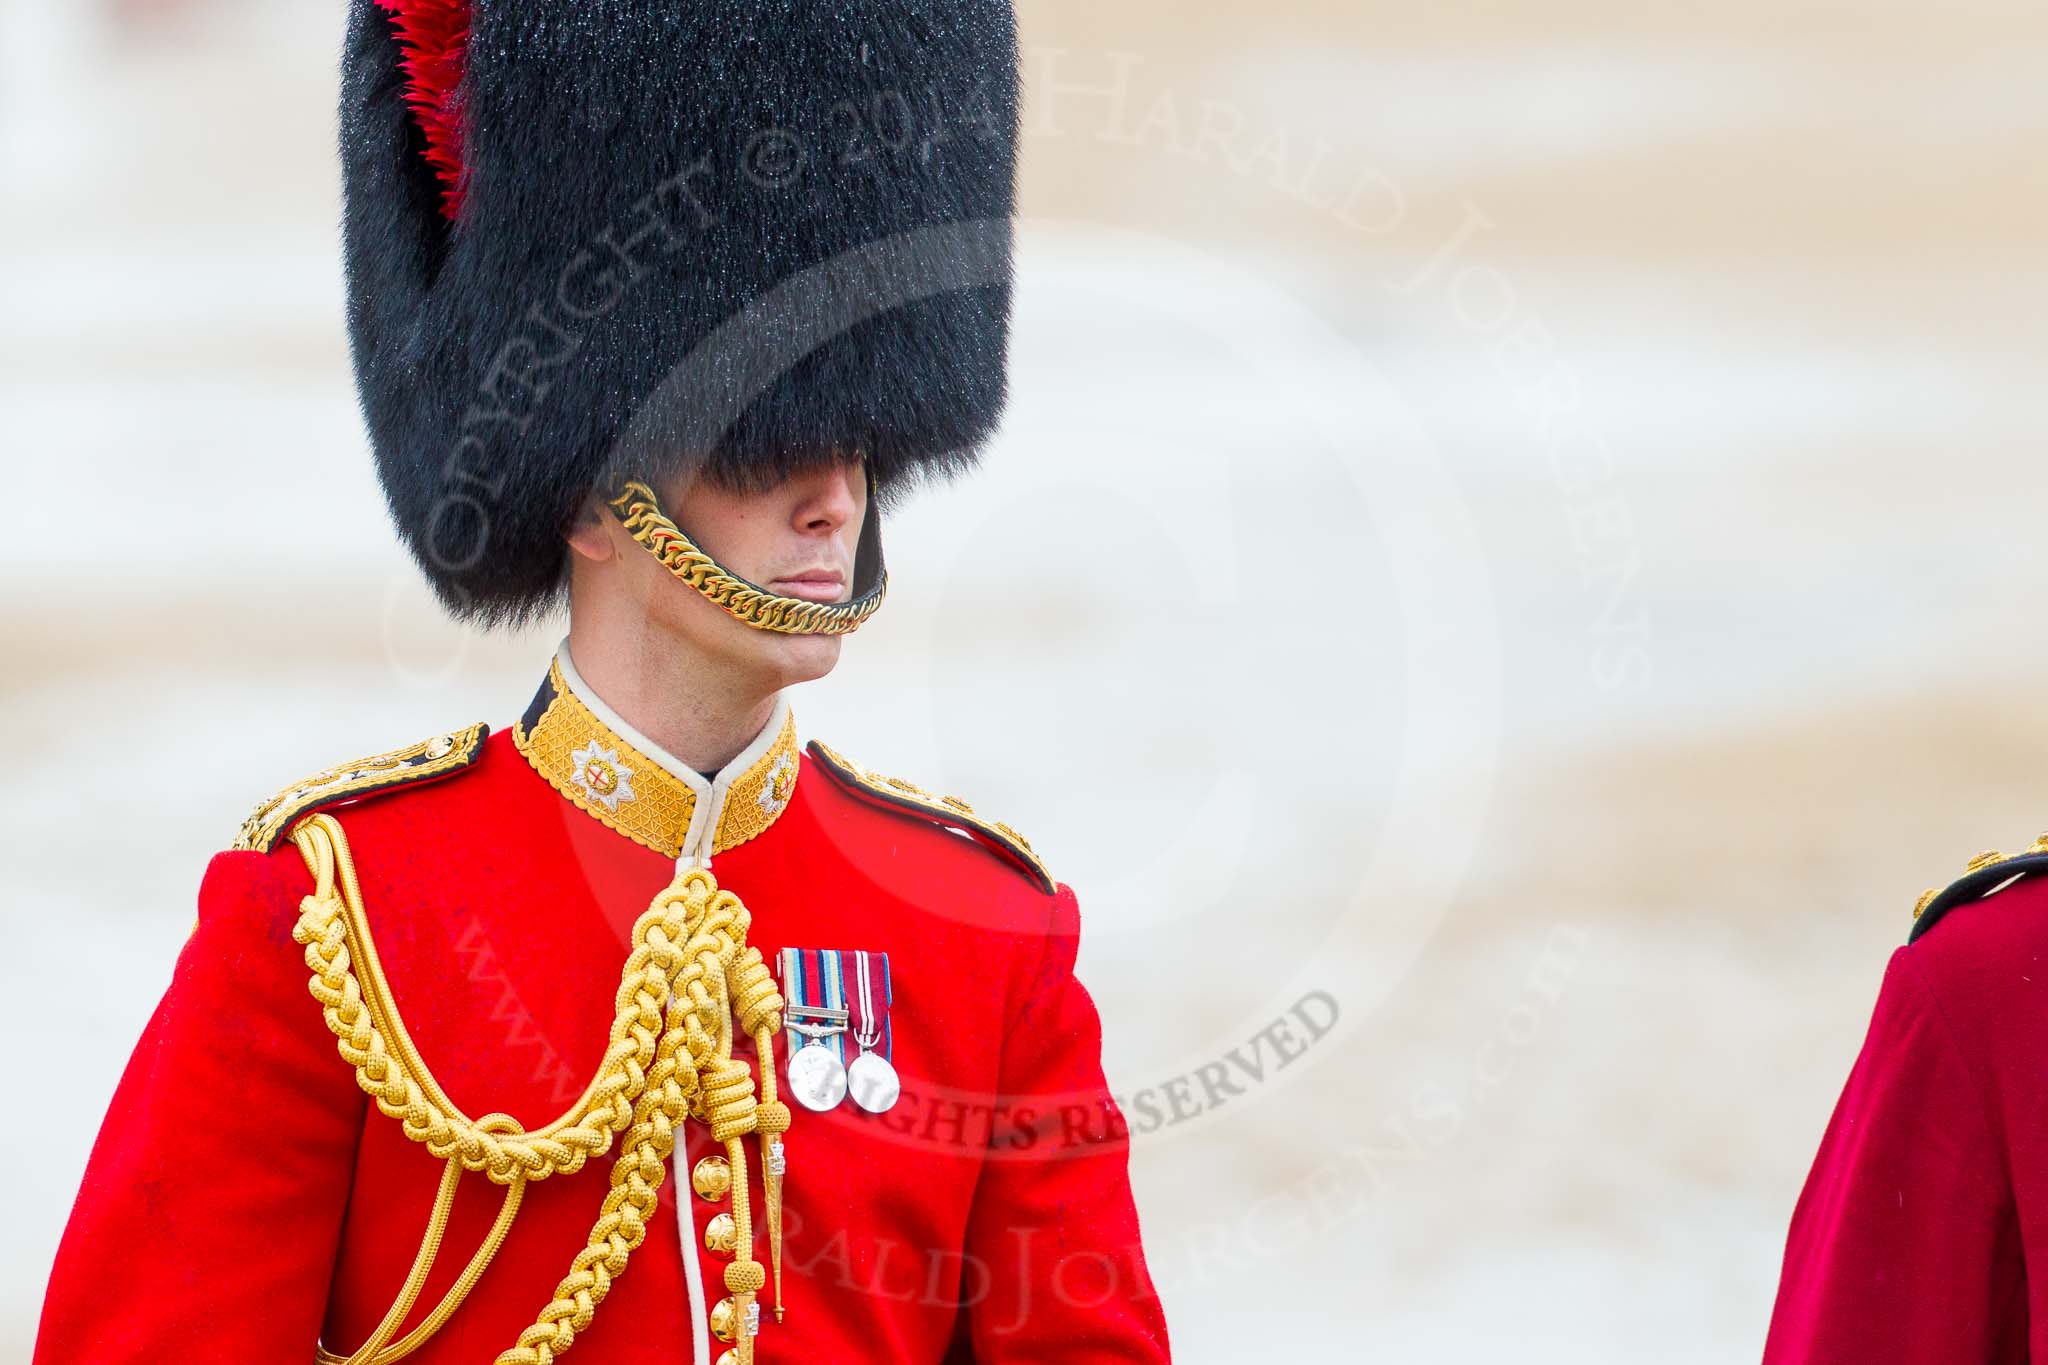 The Colonel's Review 2014.
Horse Guards Parade, Westminster,
London,

United Kingdom,
on 07 June 2014 at 11:06, image #310